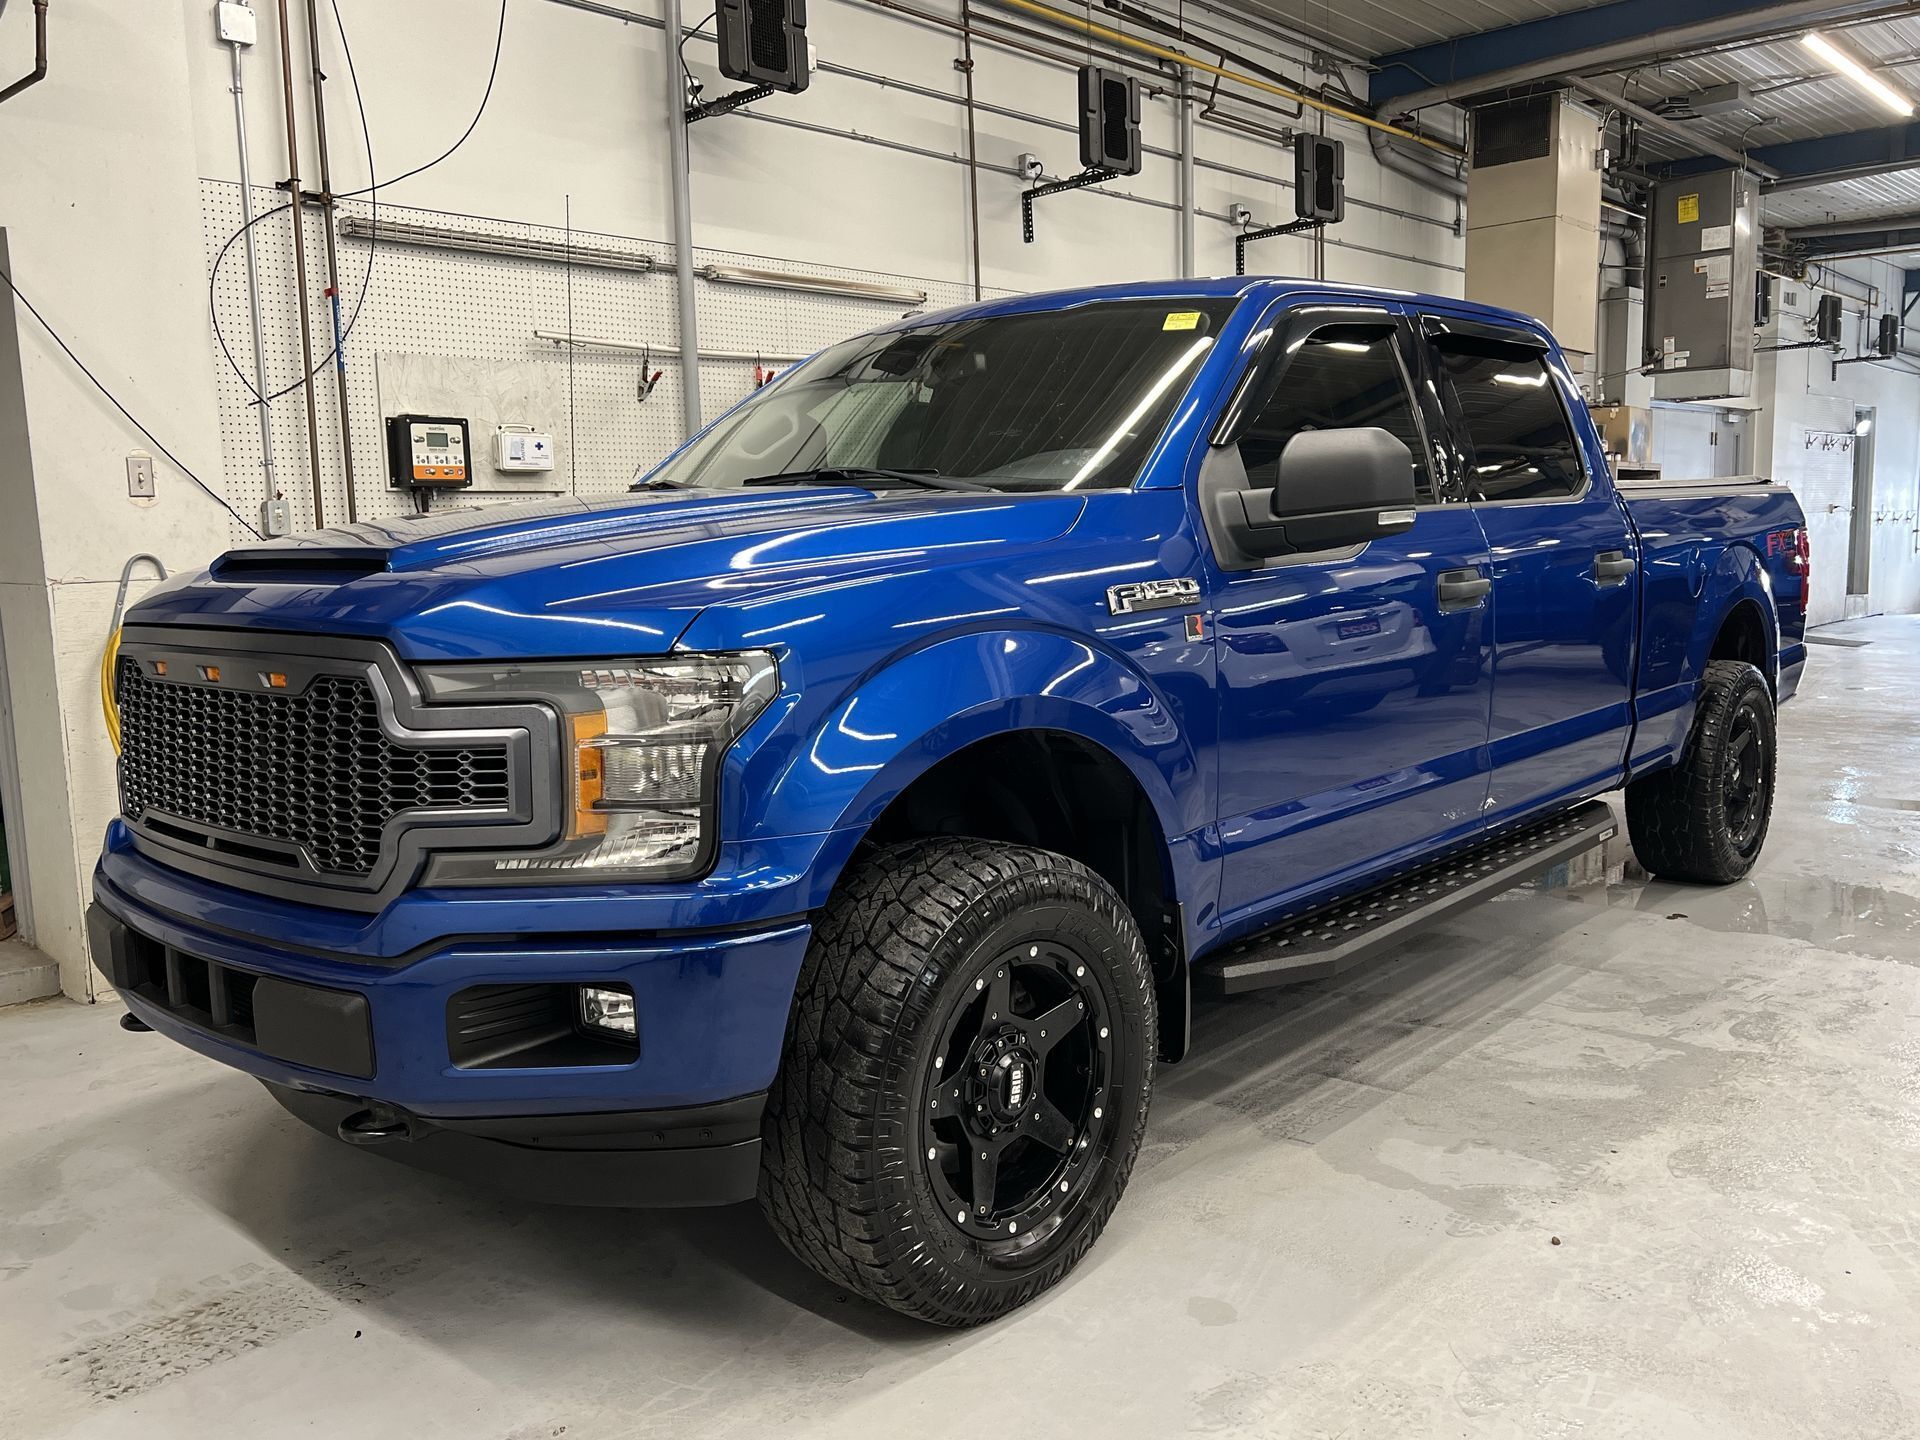 2018 Ford F-150 5.0 V8 4x4 | ROUSH SUPERCHARGER | LEATHER | 650HP!